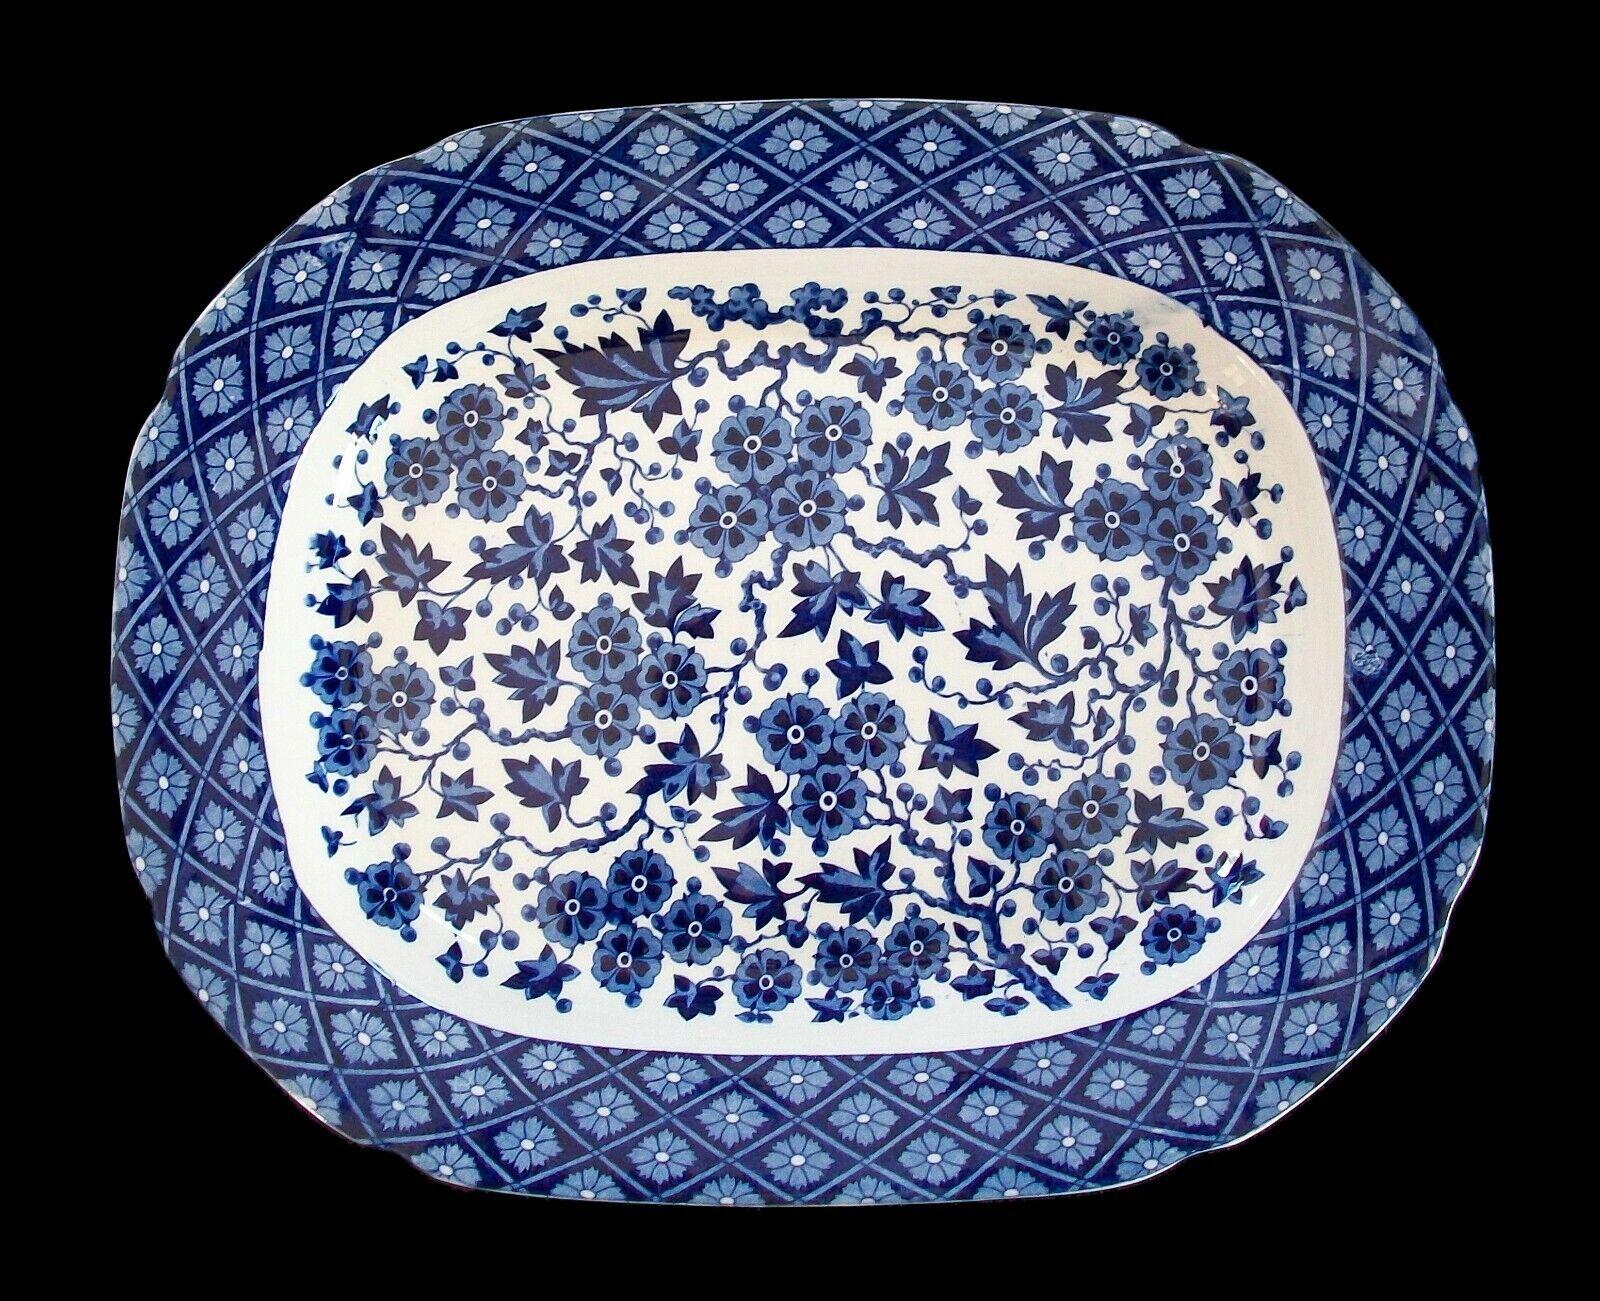 RIDGWAY - 'Hawthornden' - Antique ceramic serving platter - large size - transfer decorated in blue on a cream ground - elaborate floral decoration to the center - floral diamond pattern border - British Victorian registry mark and Ridgway mark on